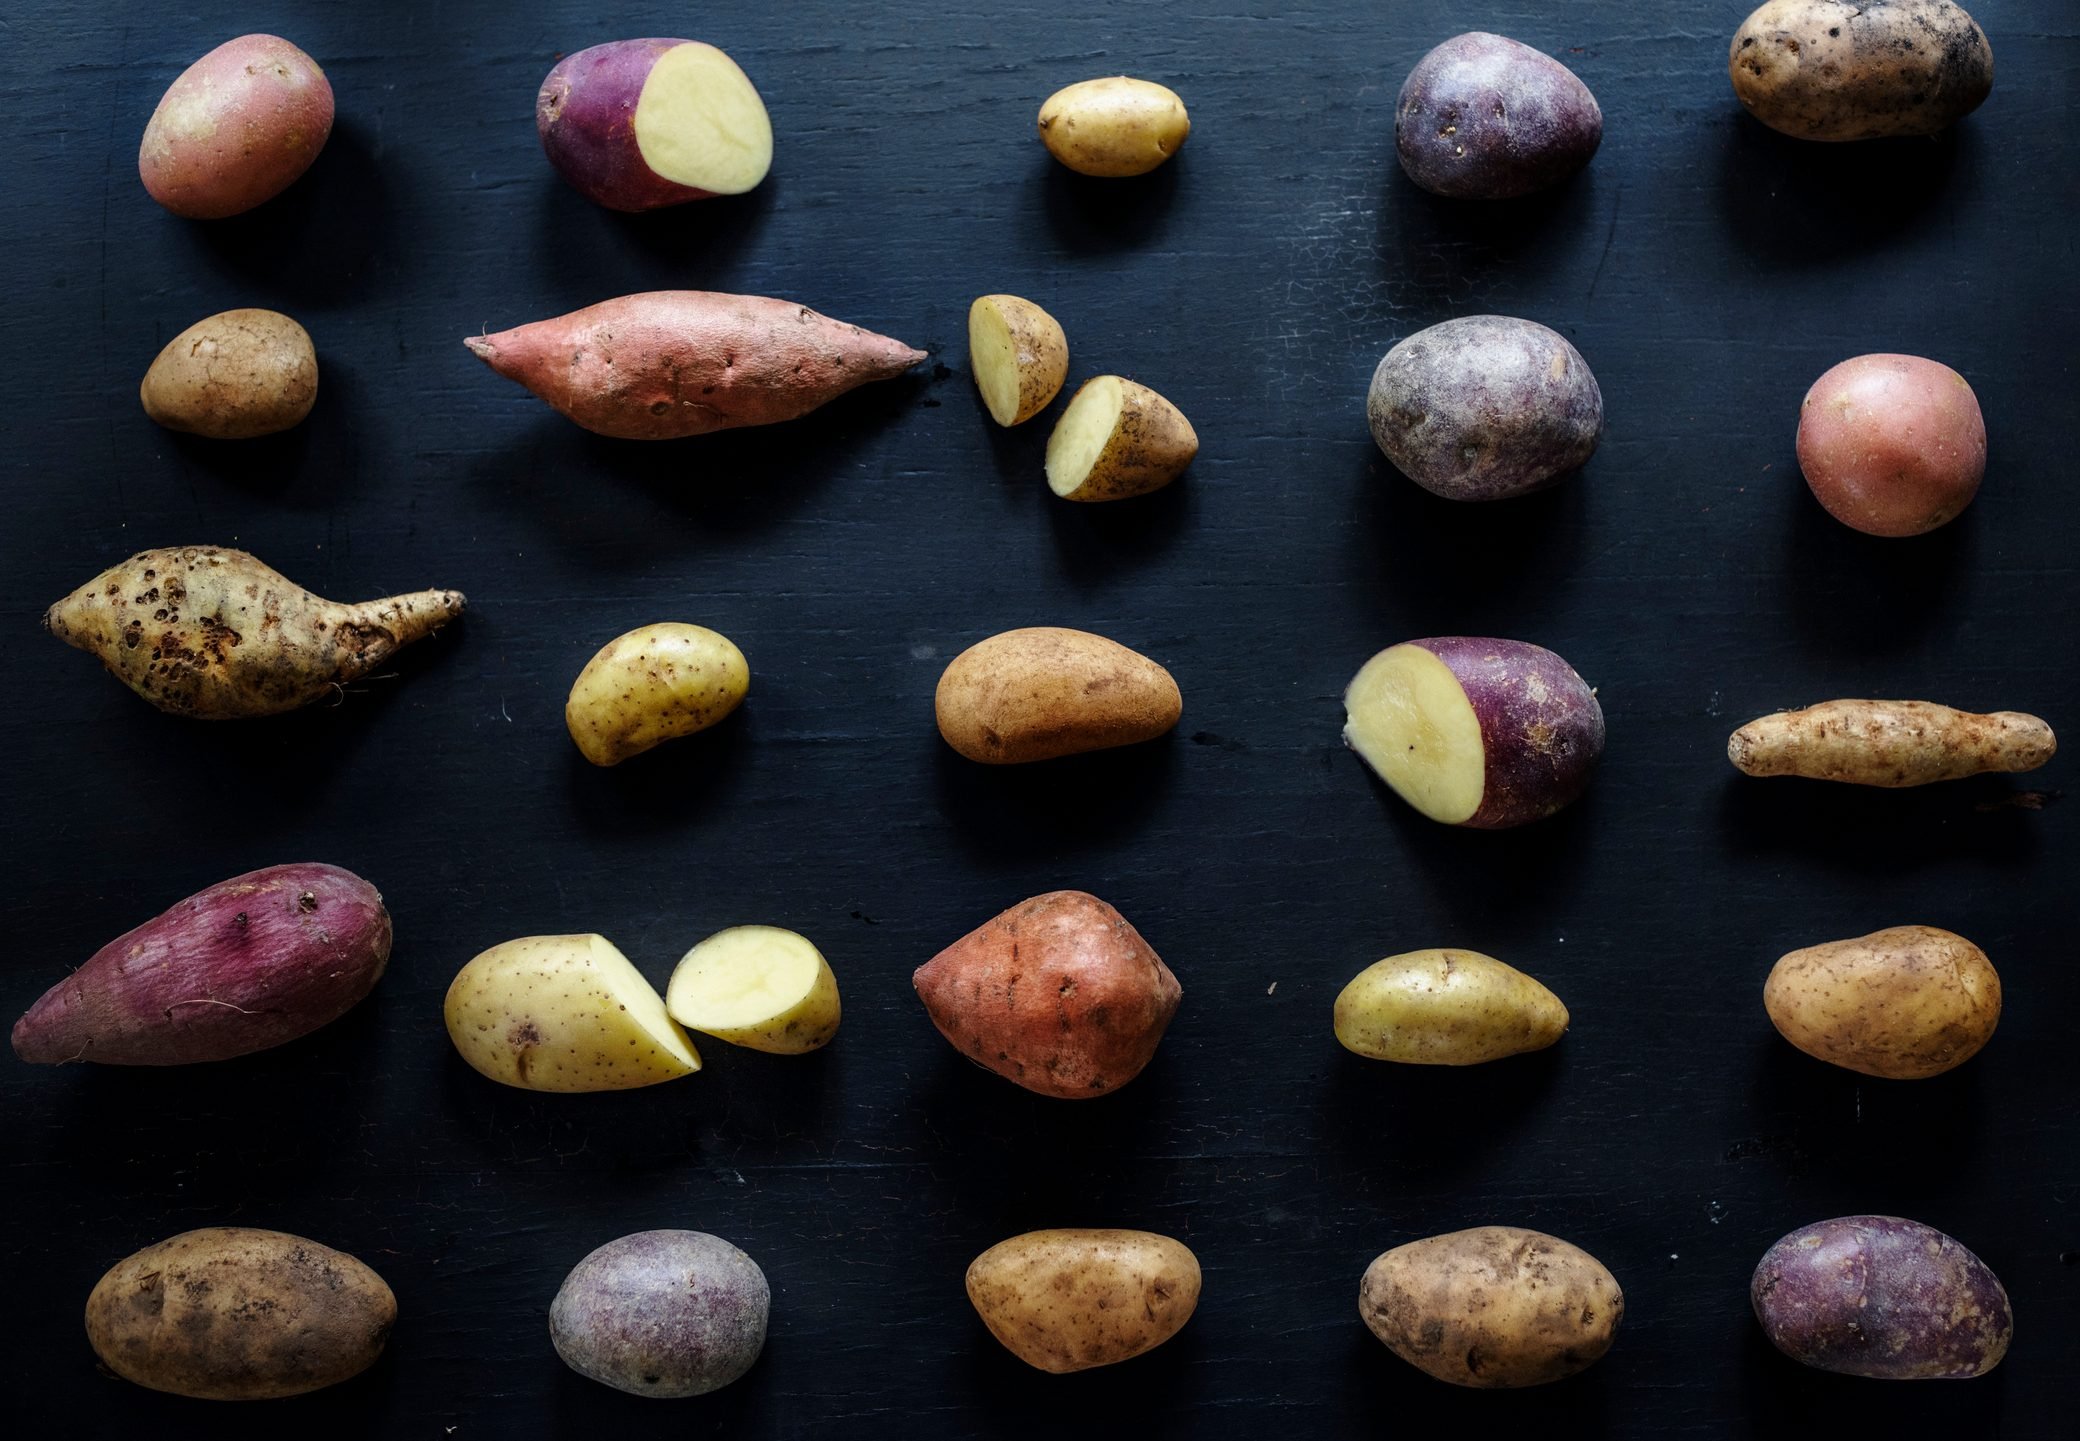 Are Potatoes Healthy? Here's What Registered Dietitians Say